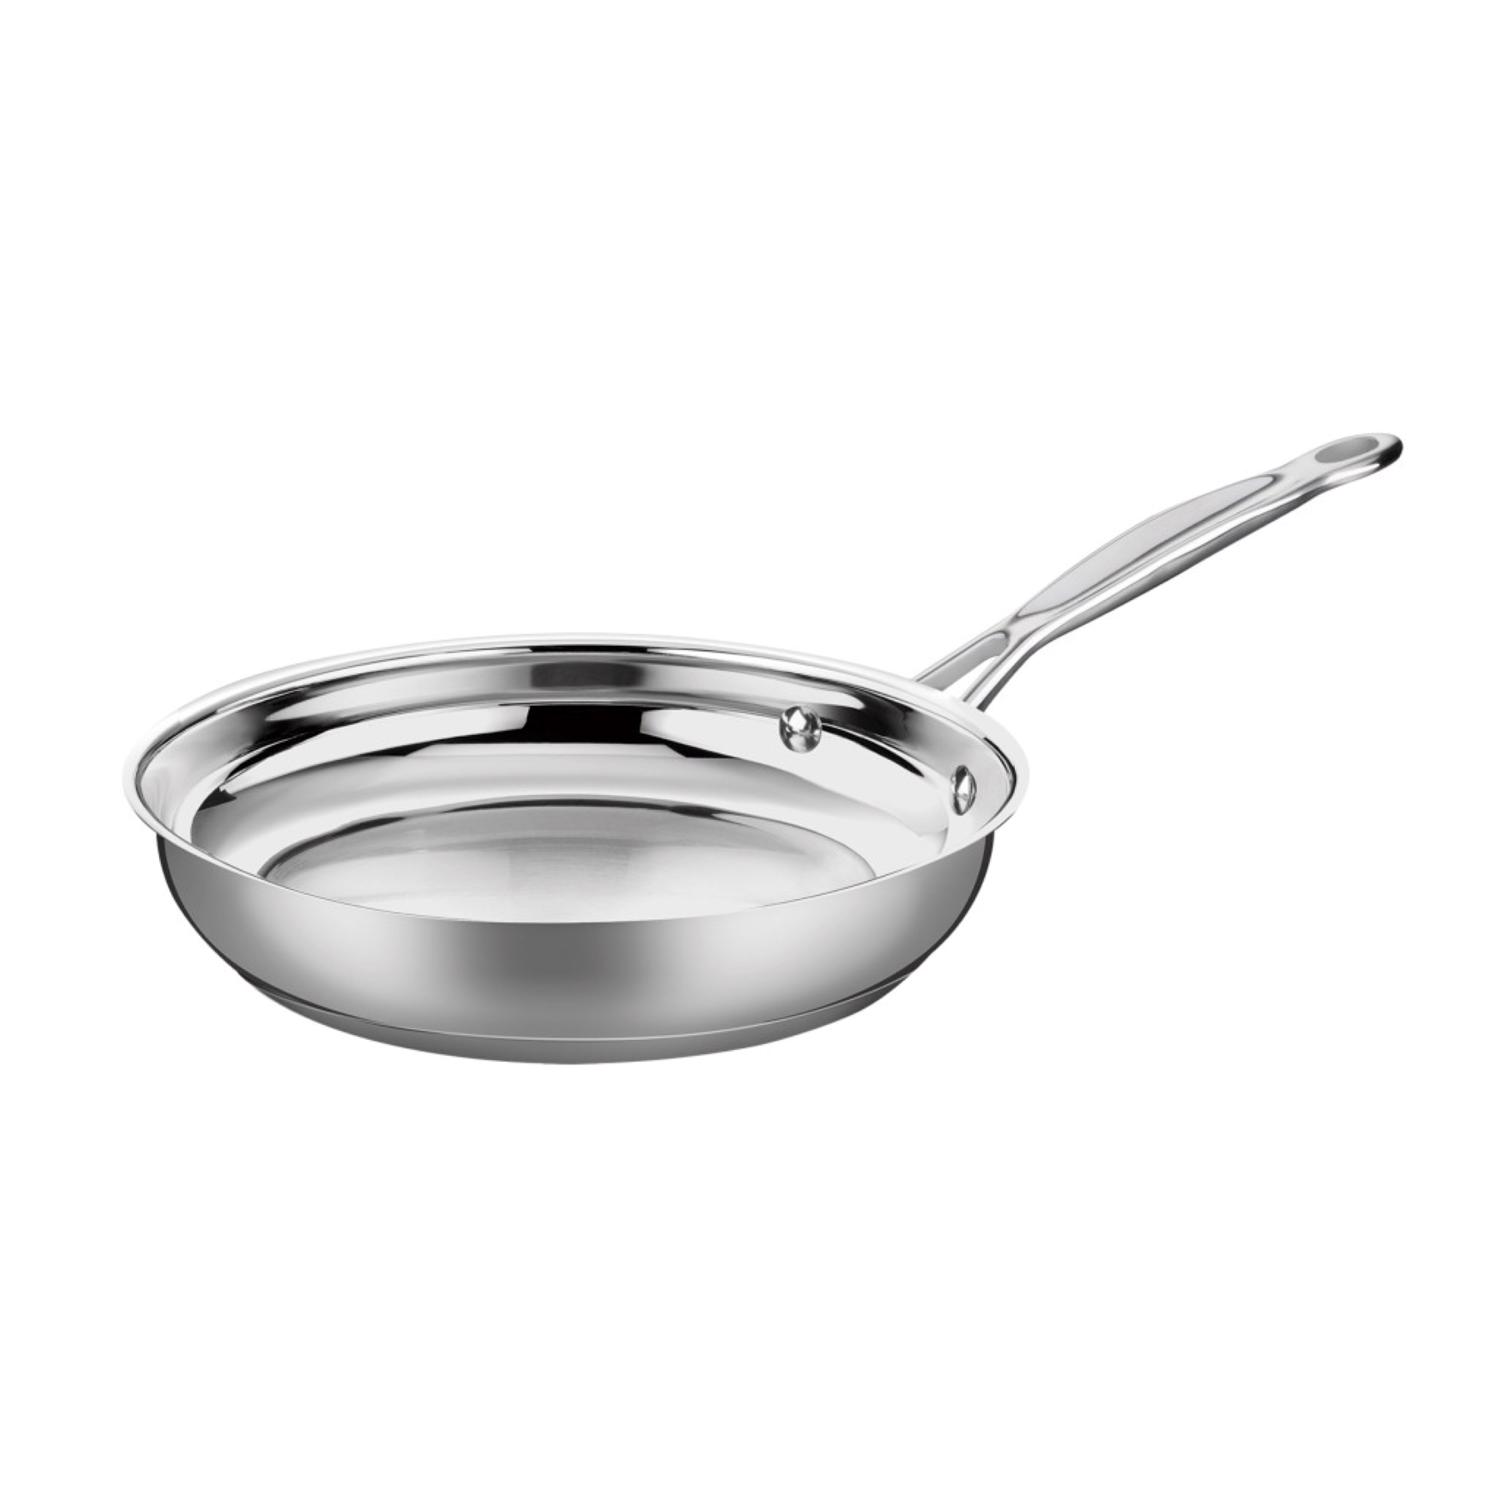 Photos - Other Accessories Cuisinart Chef's Classic Stainless Steel Skillet 8 in. Silver 722-20 